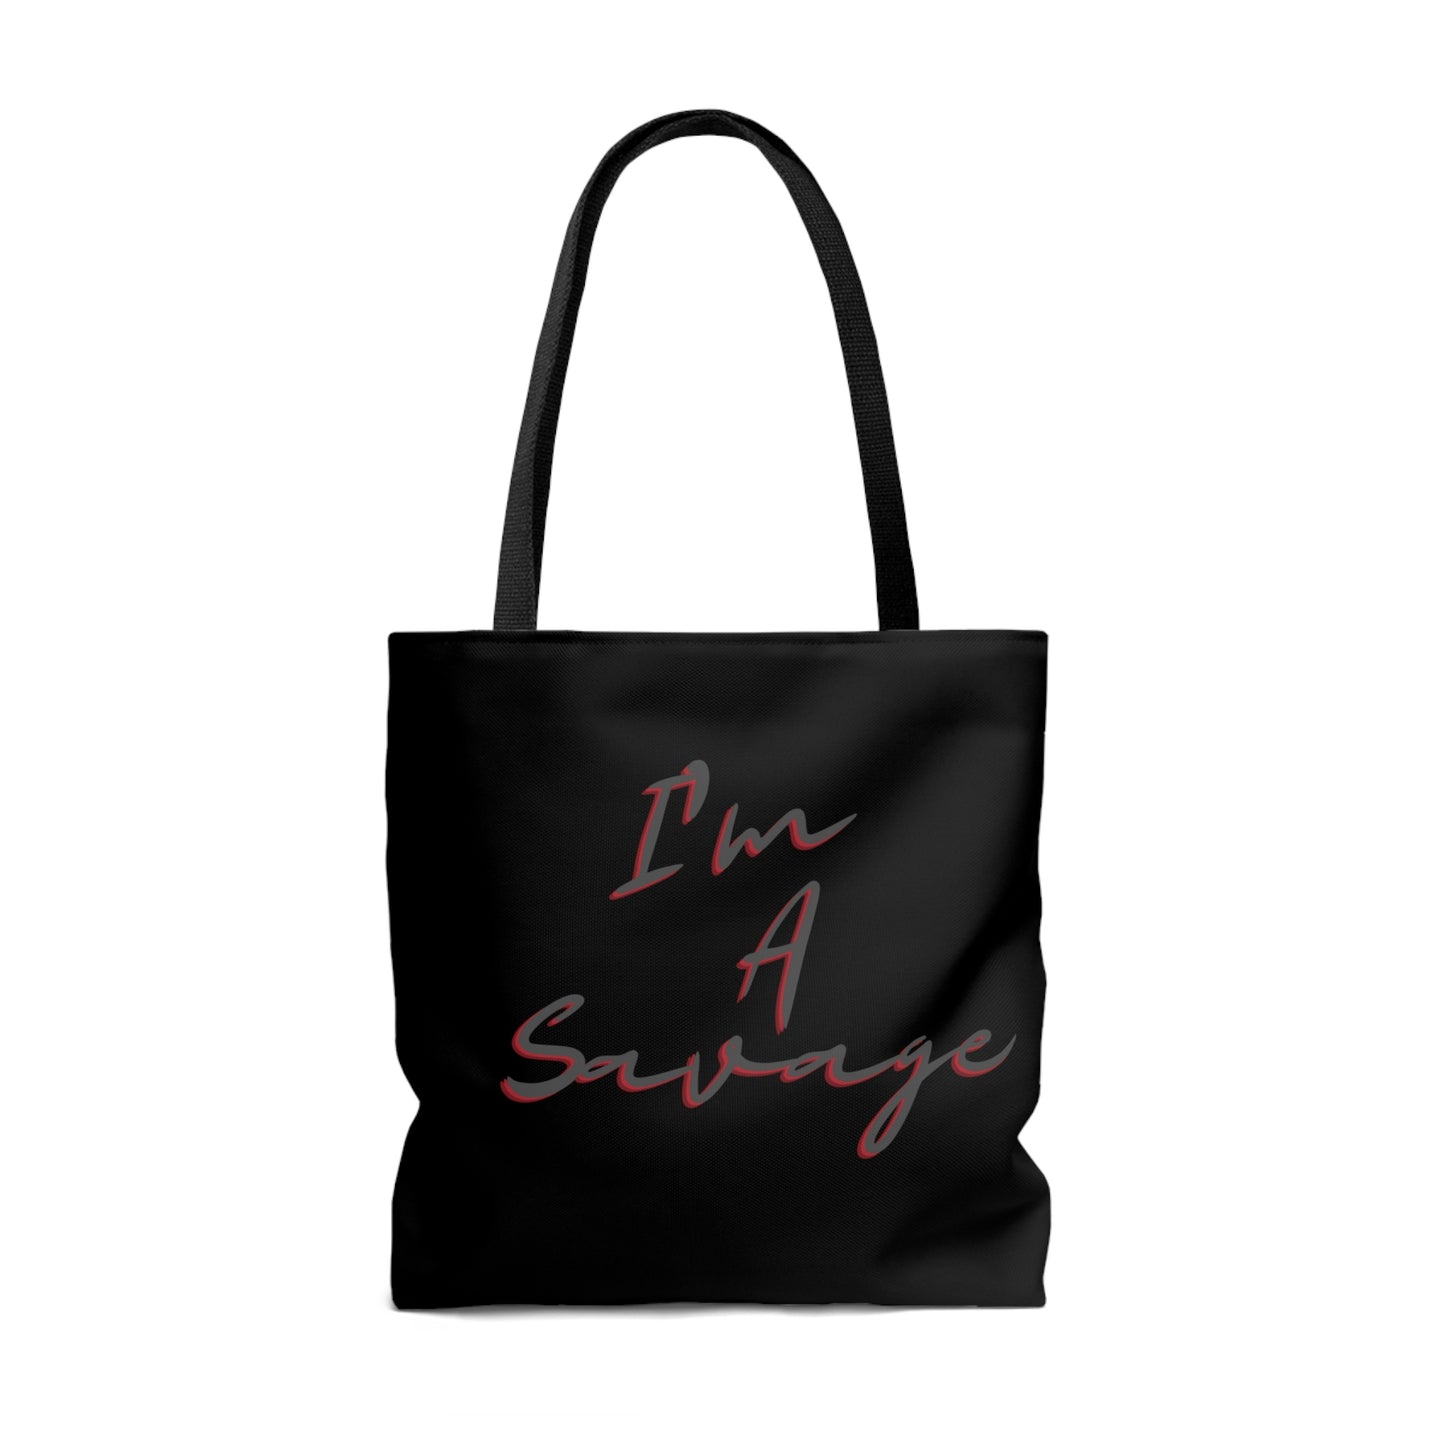 Savage AOP Tote Bag | BKLA | shoes & accessories | backpack, hat, phone cover, tote bags, clutch bags